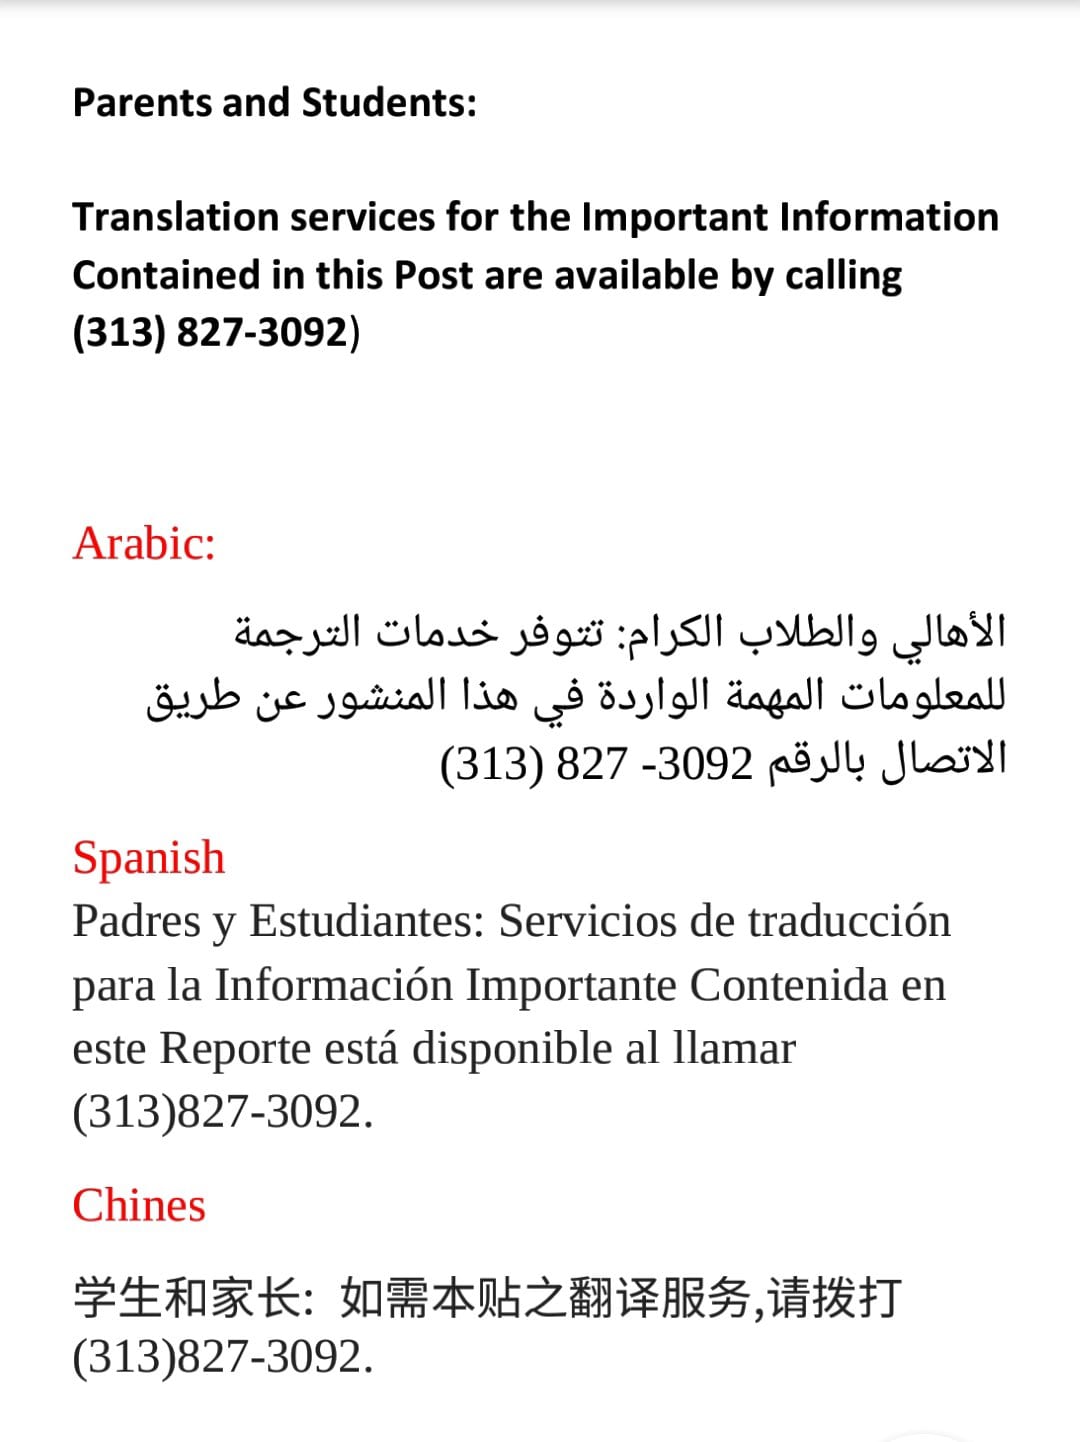 Translation Services Available Through Dearborn Schools